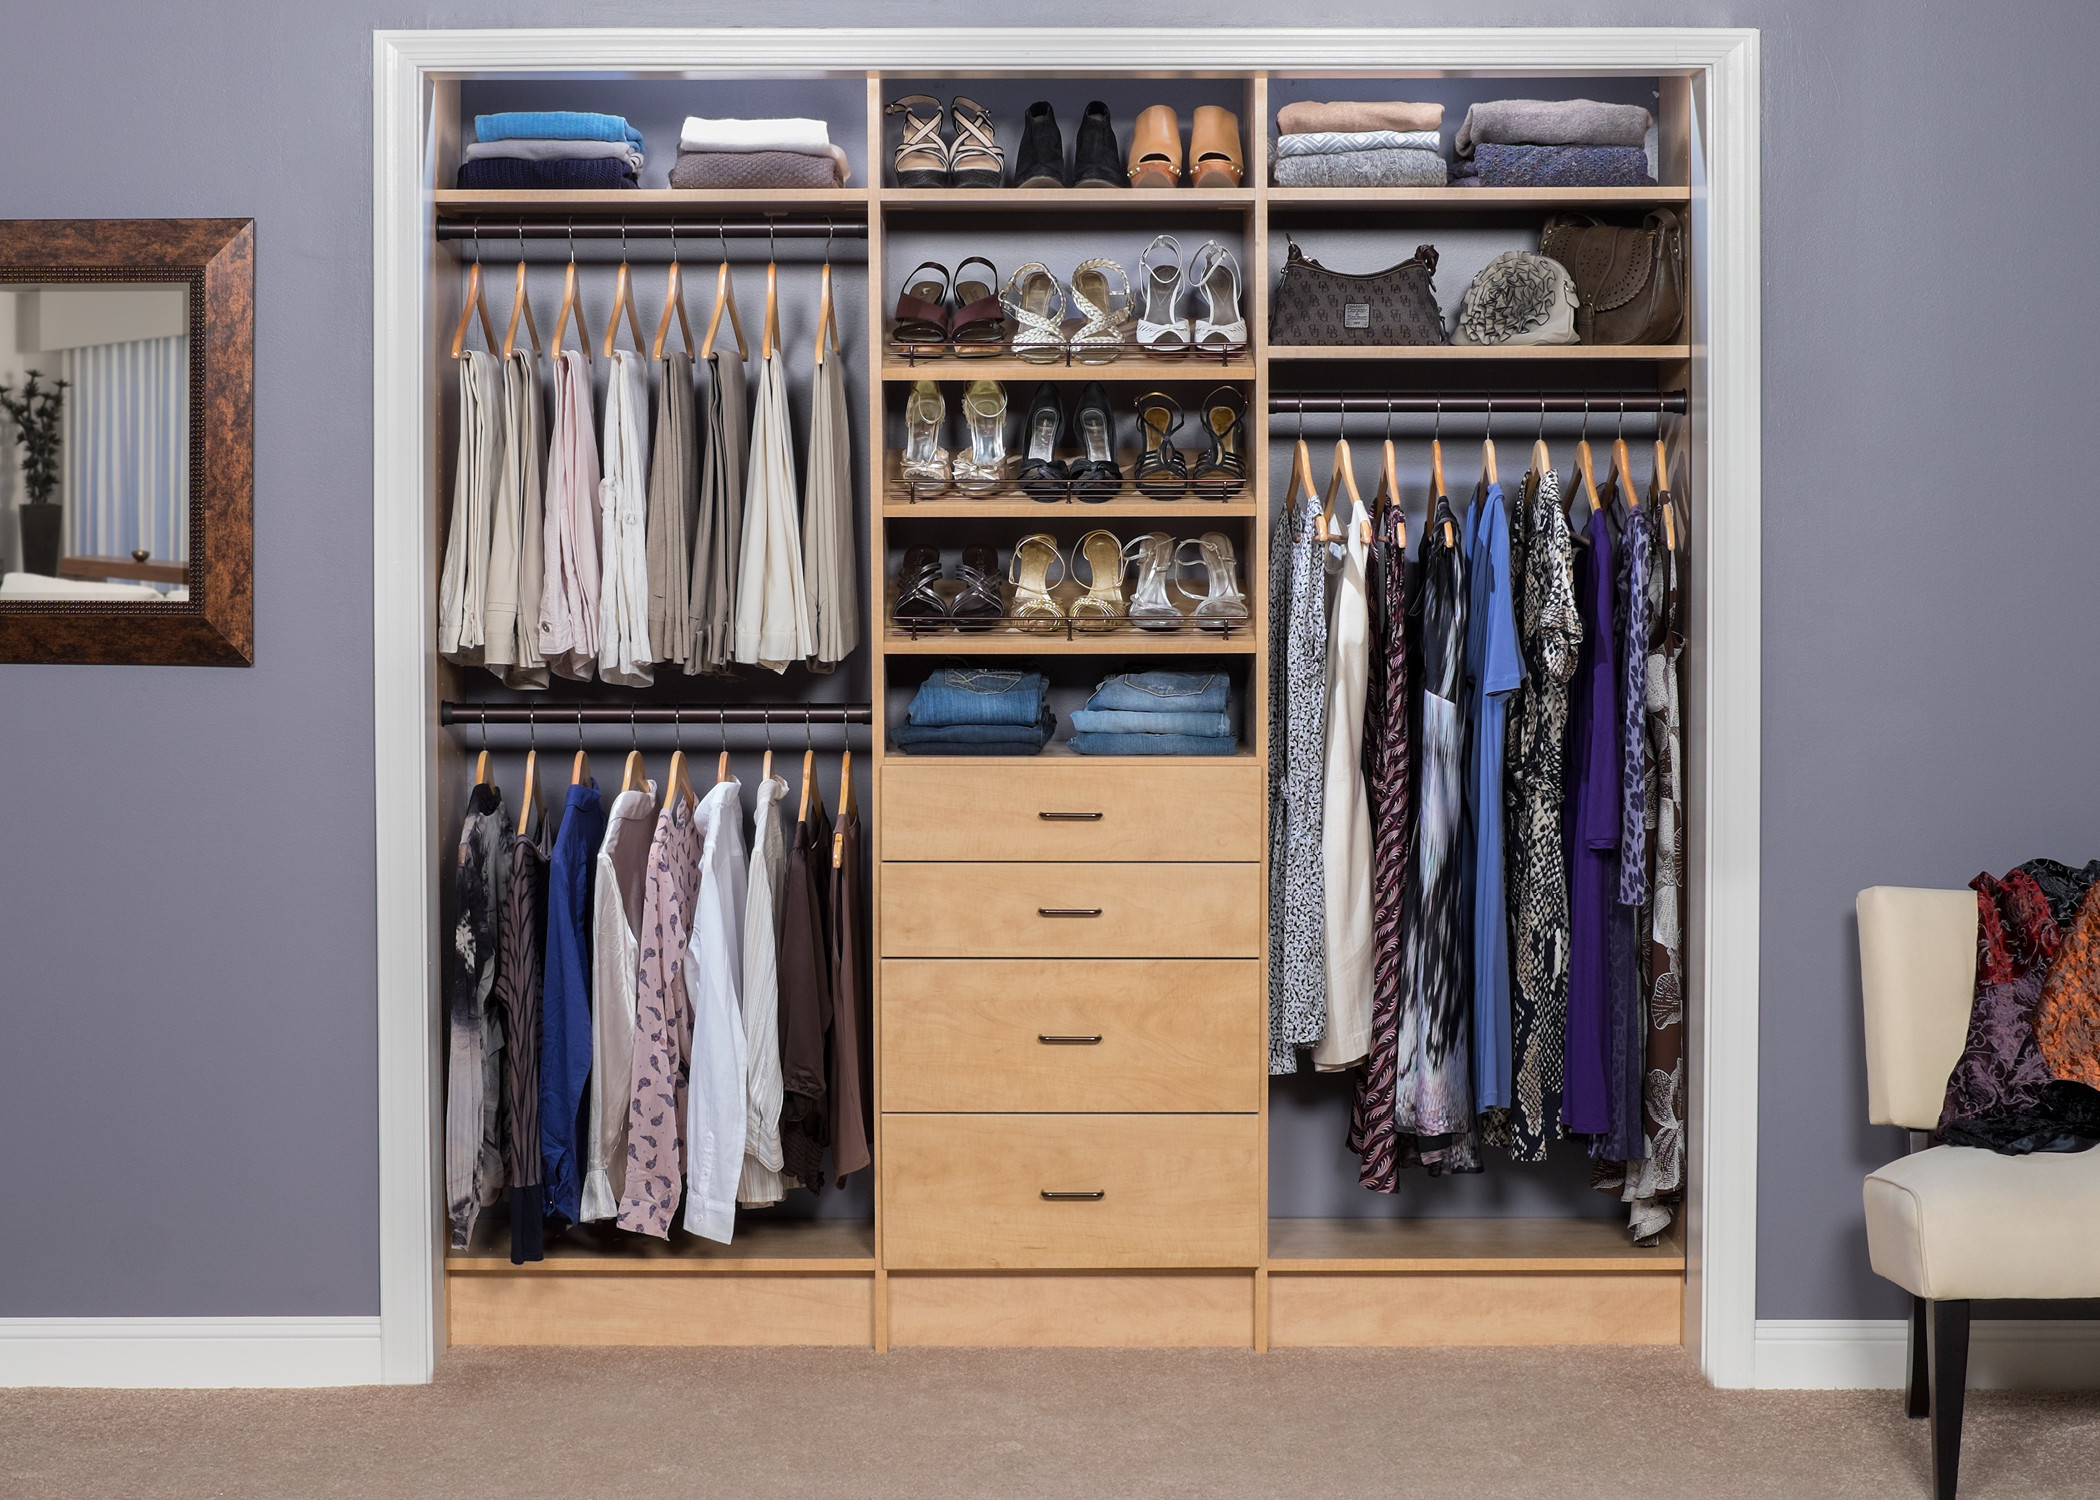 Elevate Your Home Organization with Innovative Closet Systems in Overland Park